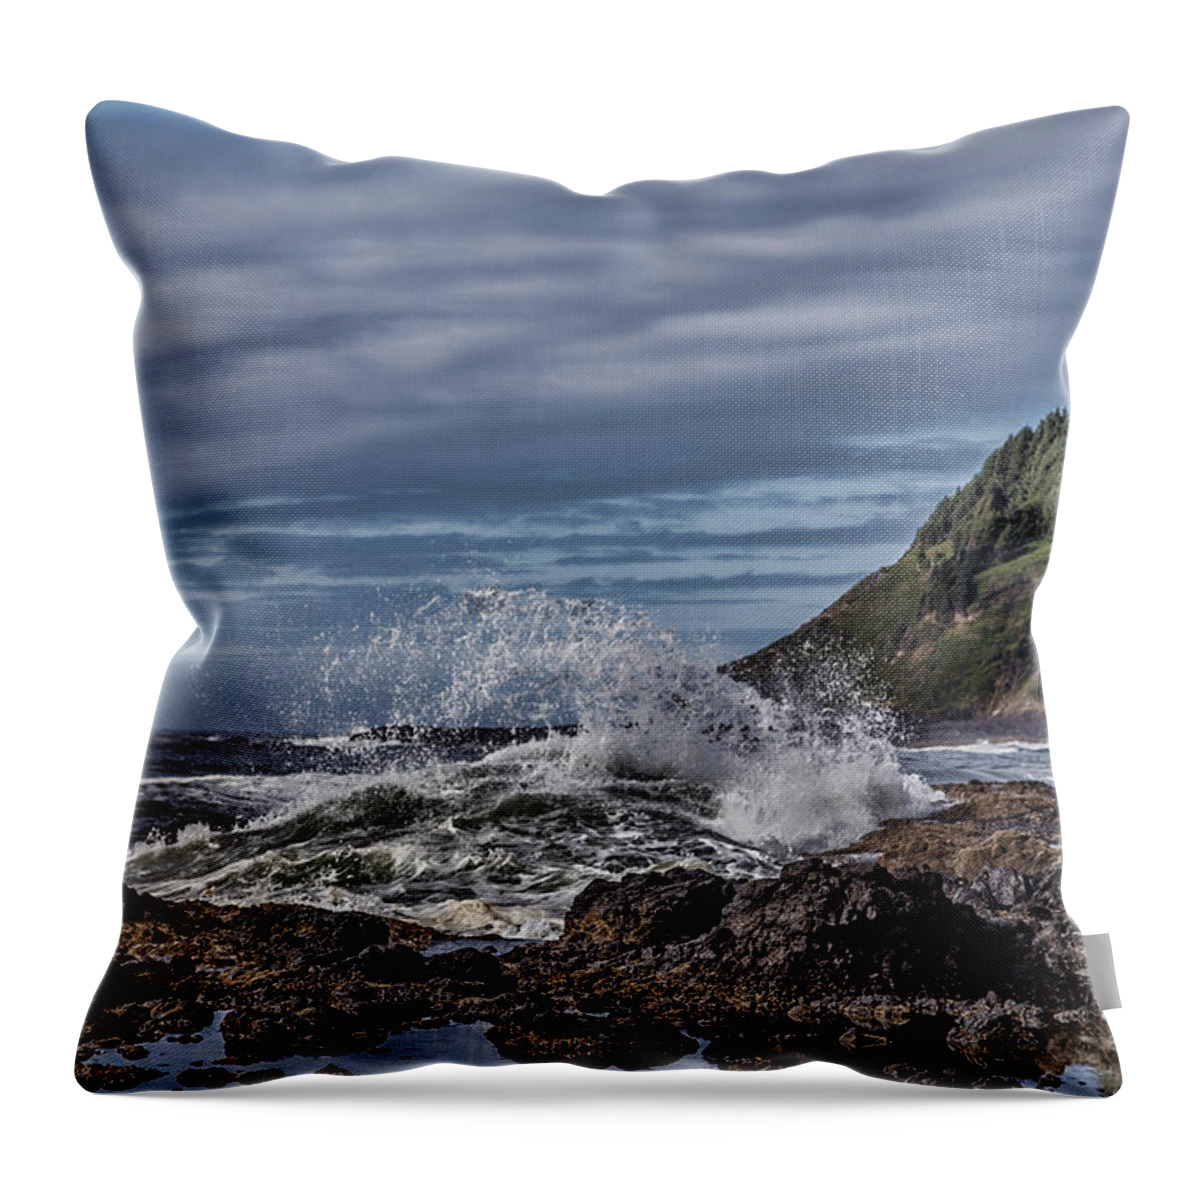 Cape Perpetua Waves Throw Pillow featuring the photograph Cape Perpetua Waves by Wes and Dotty Weber